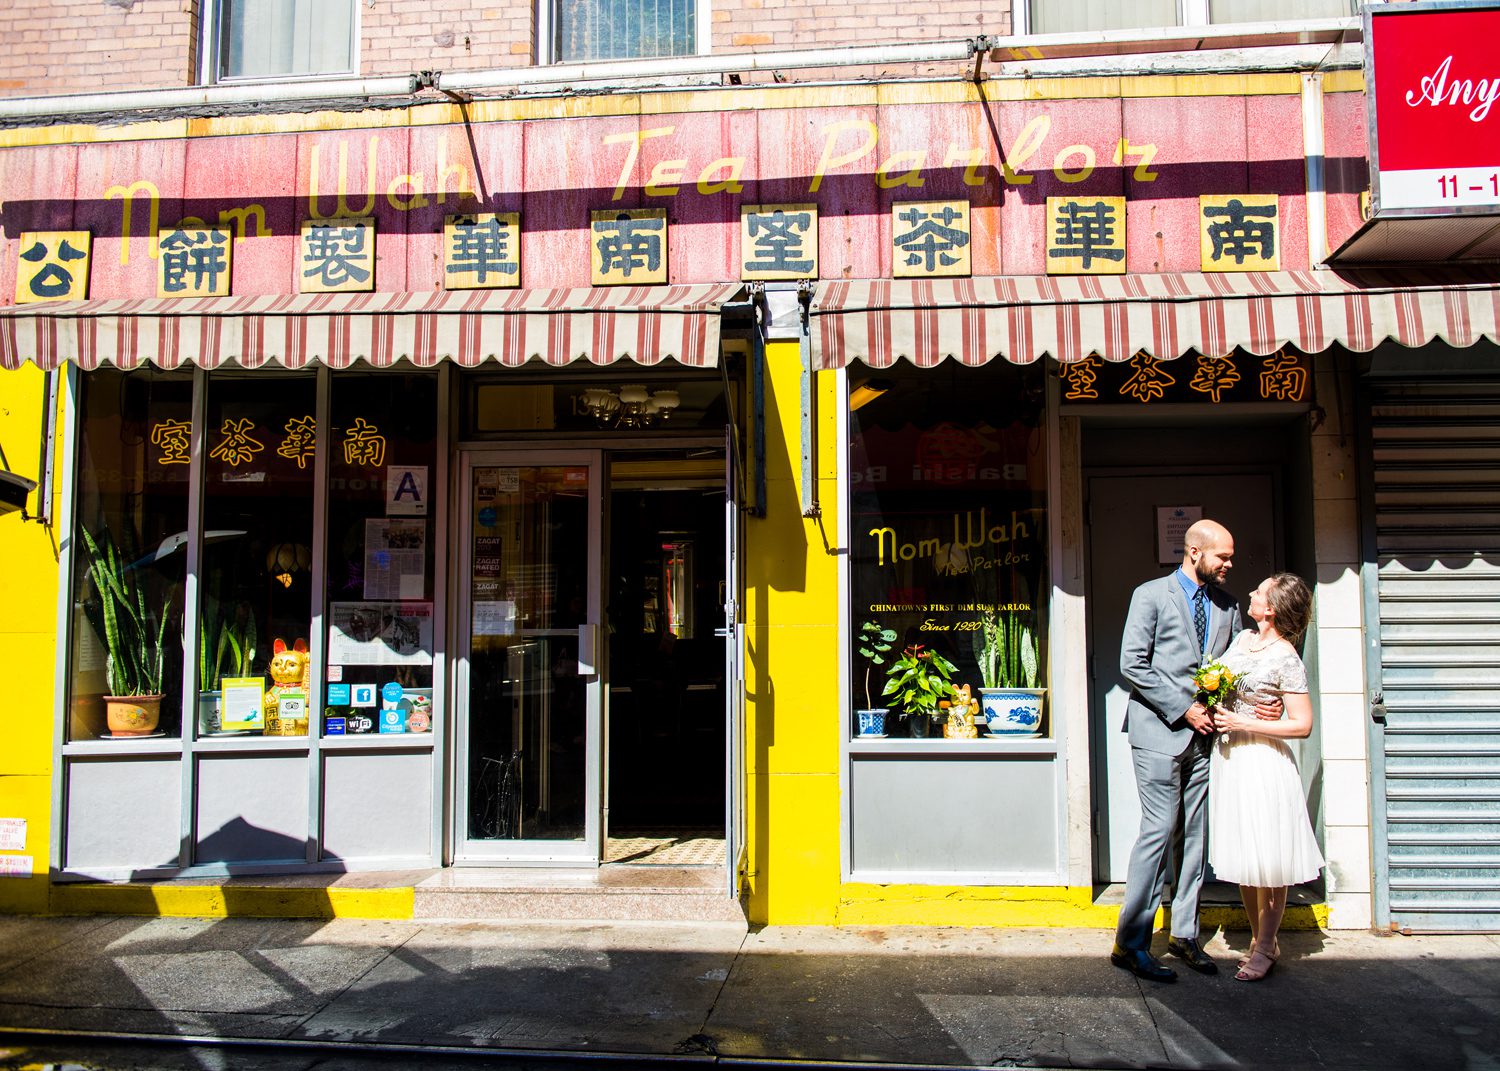 Wedding Photos in Chinatown NYC